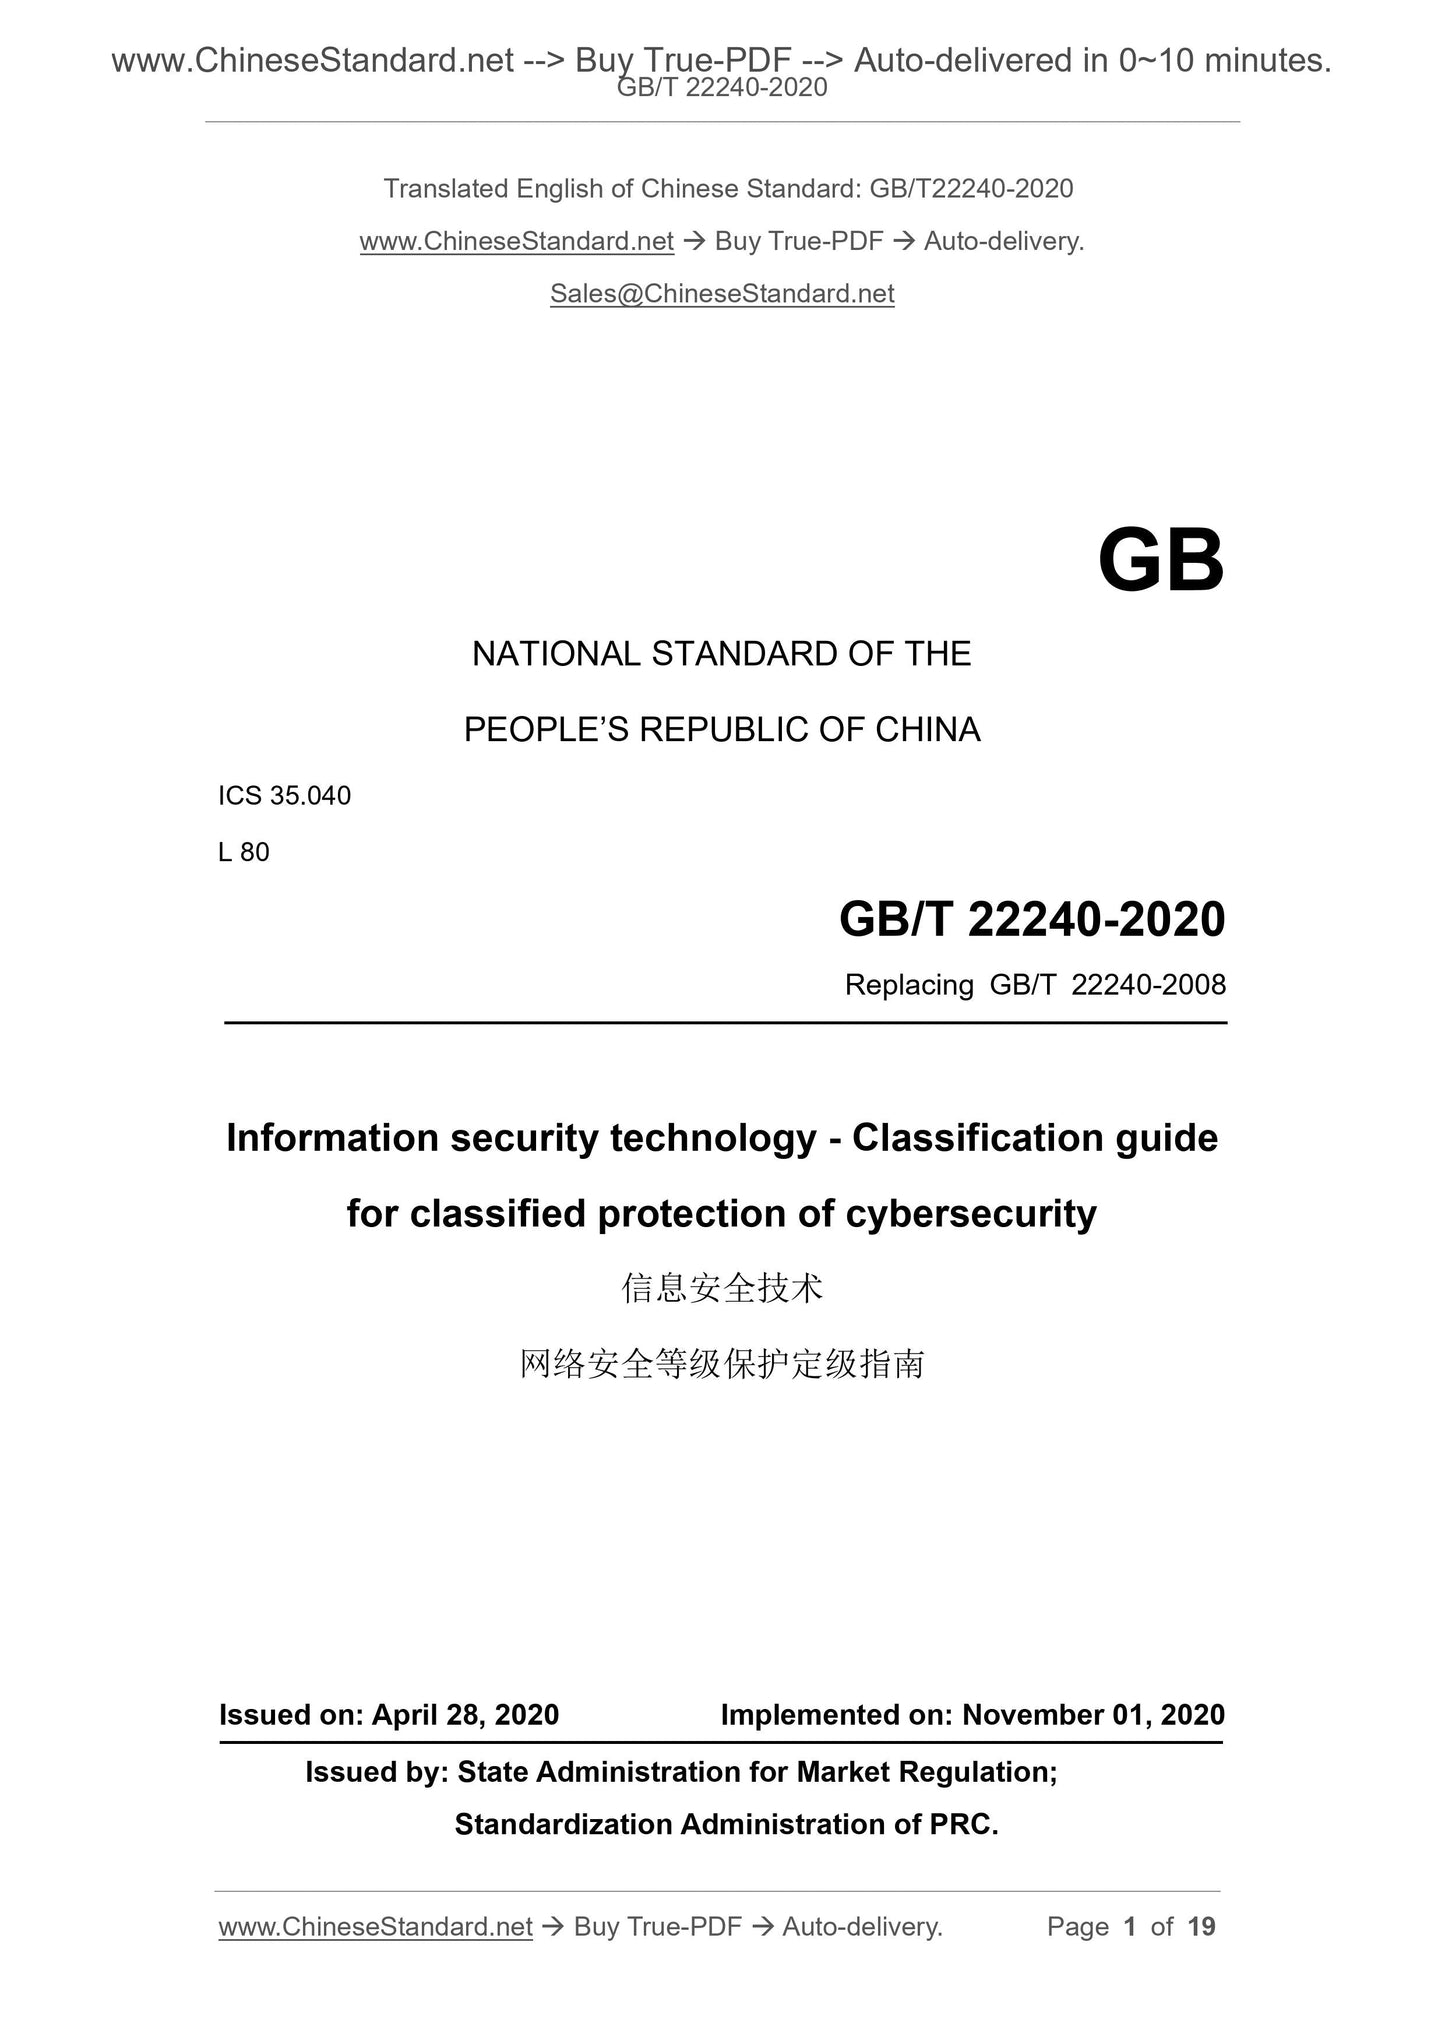 GB/T 22240-2020 Page 1